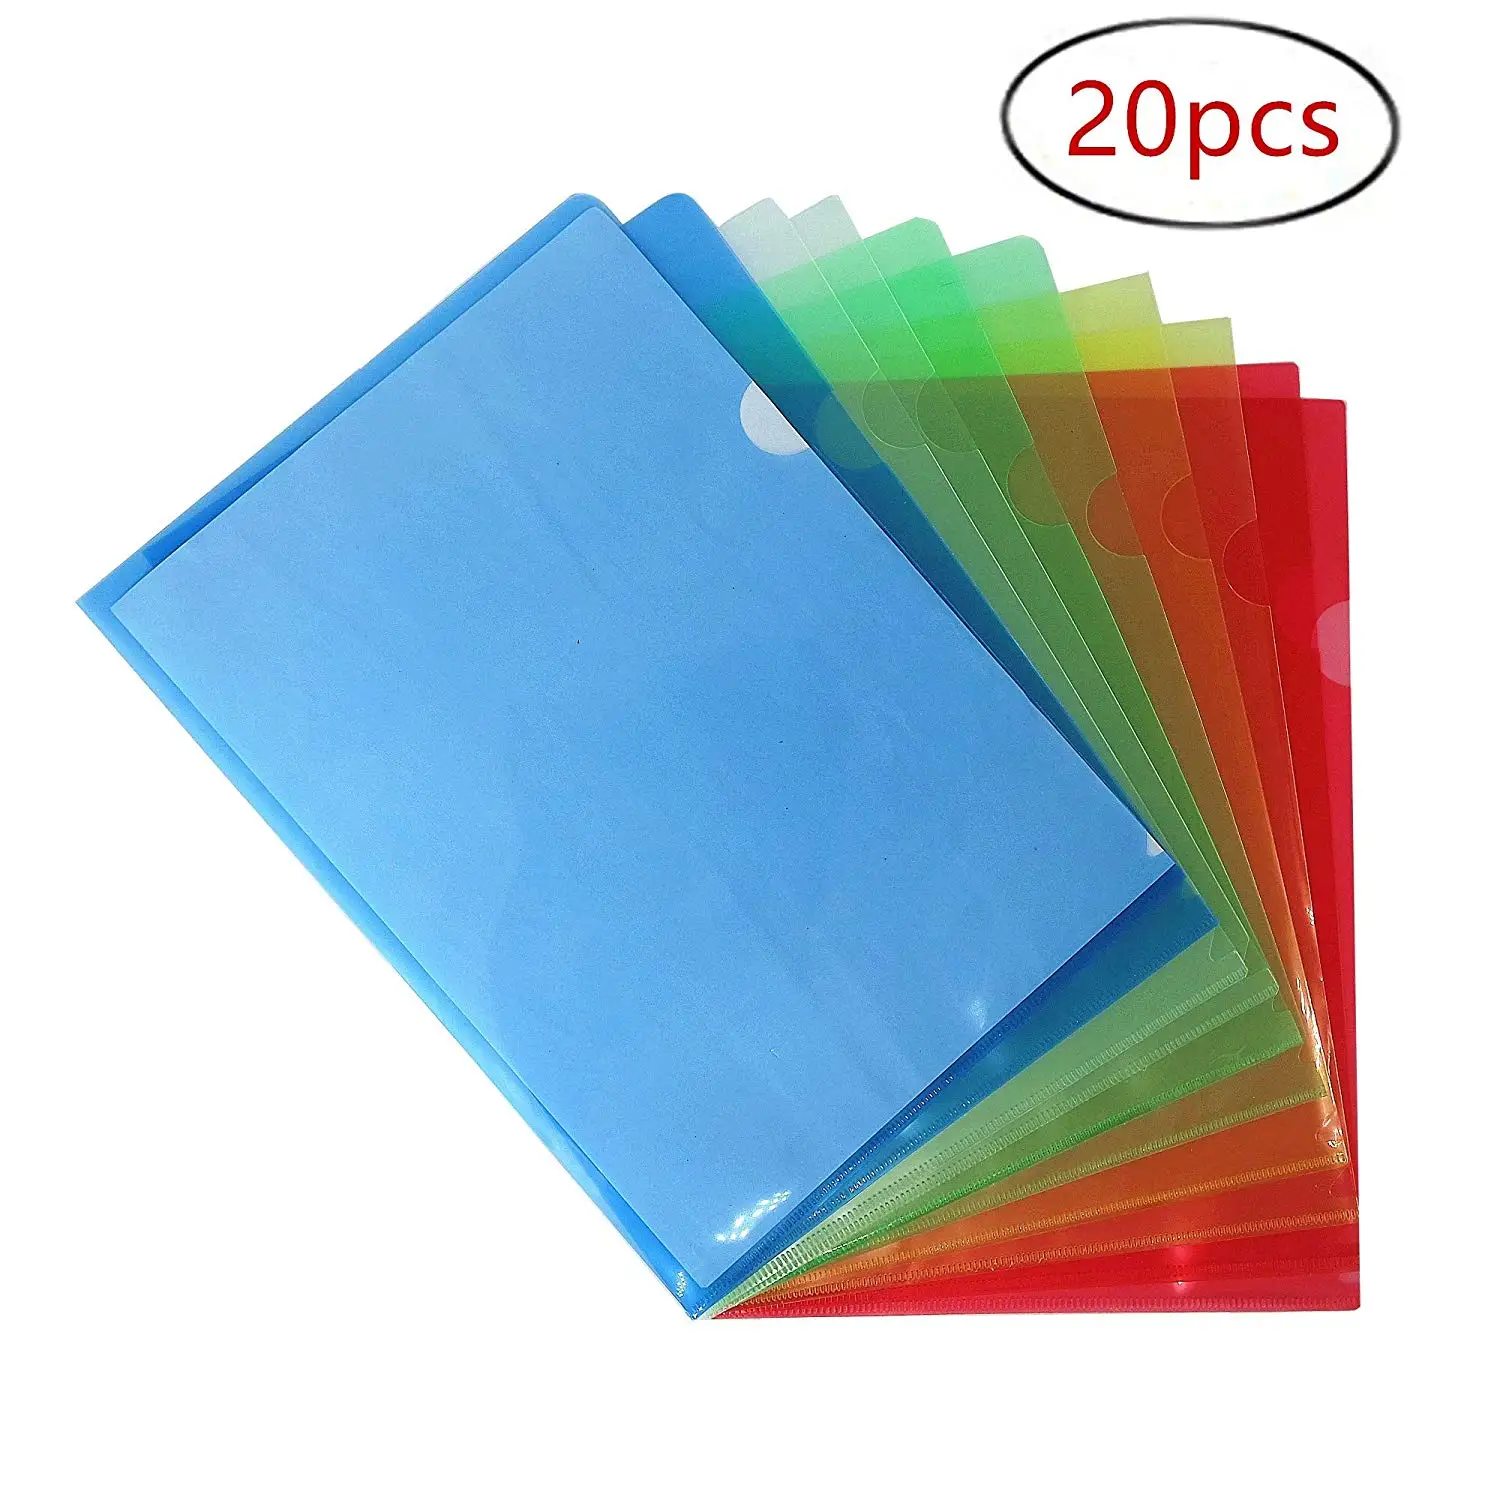 Cheap Clear Plastic Folder Sleeves, find Clear Plastic